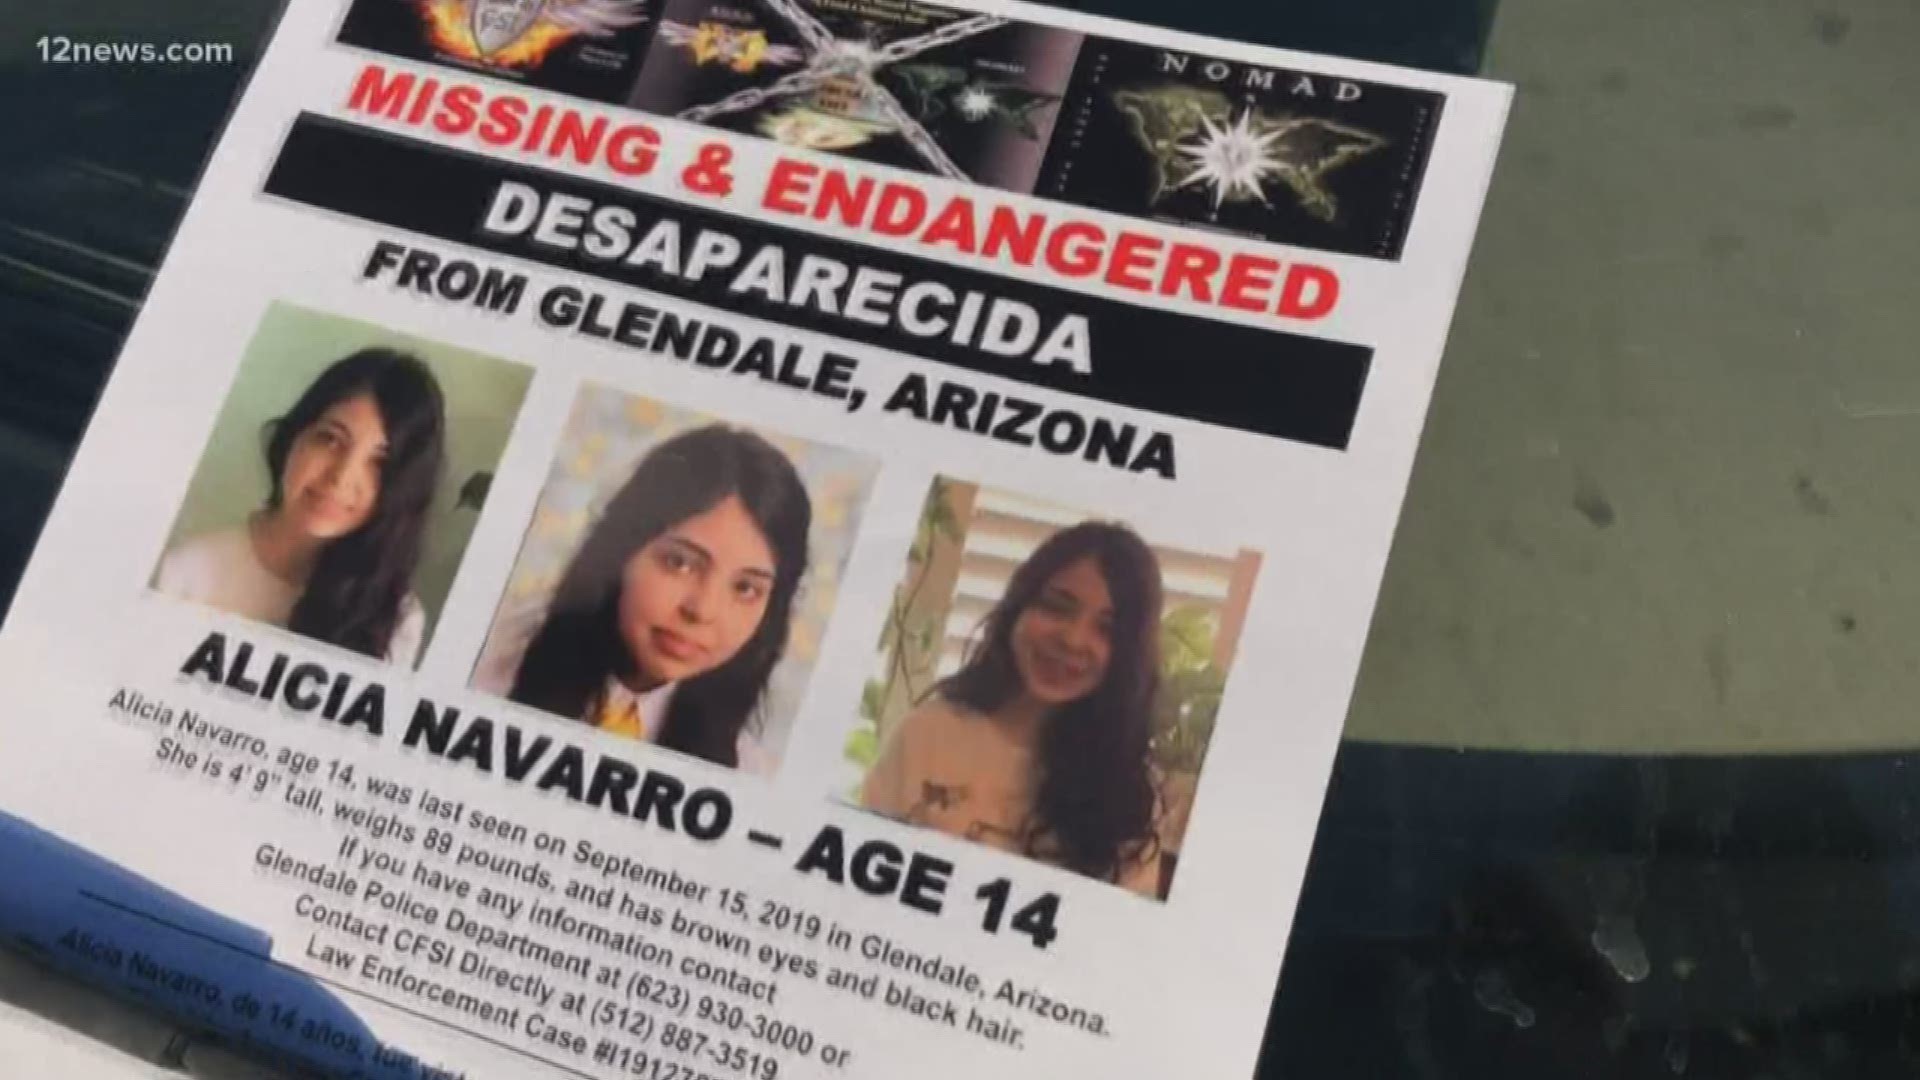 Alicia Navarro has been missing since Sunday after she disappeared from her Glendale home.